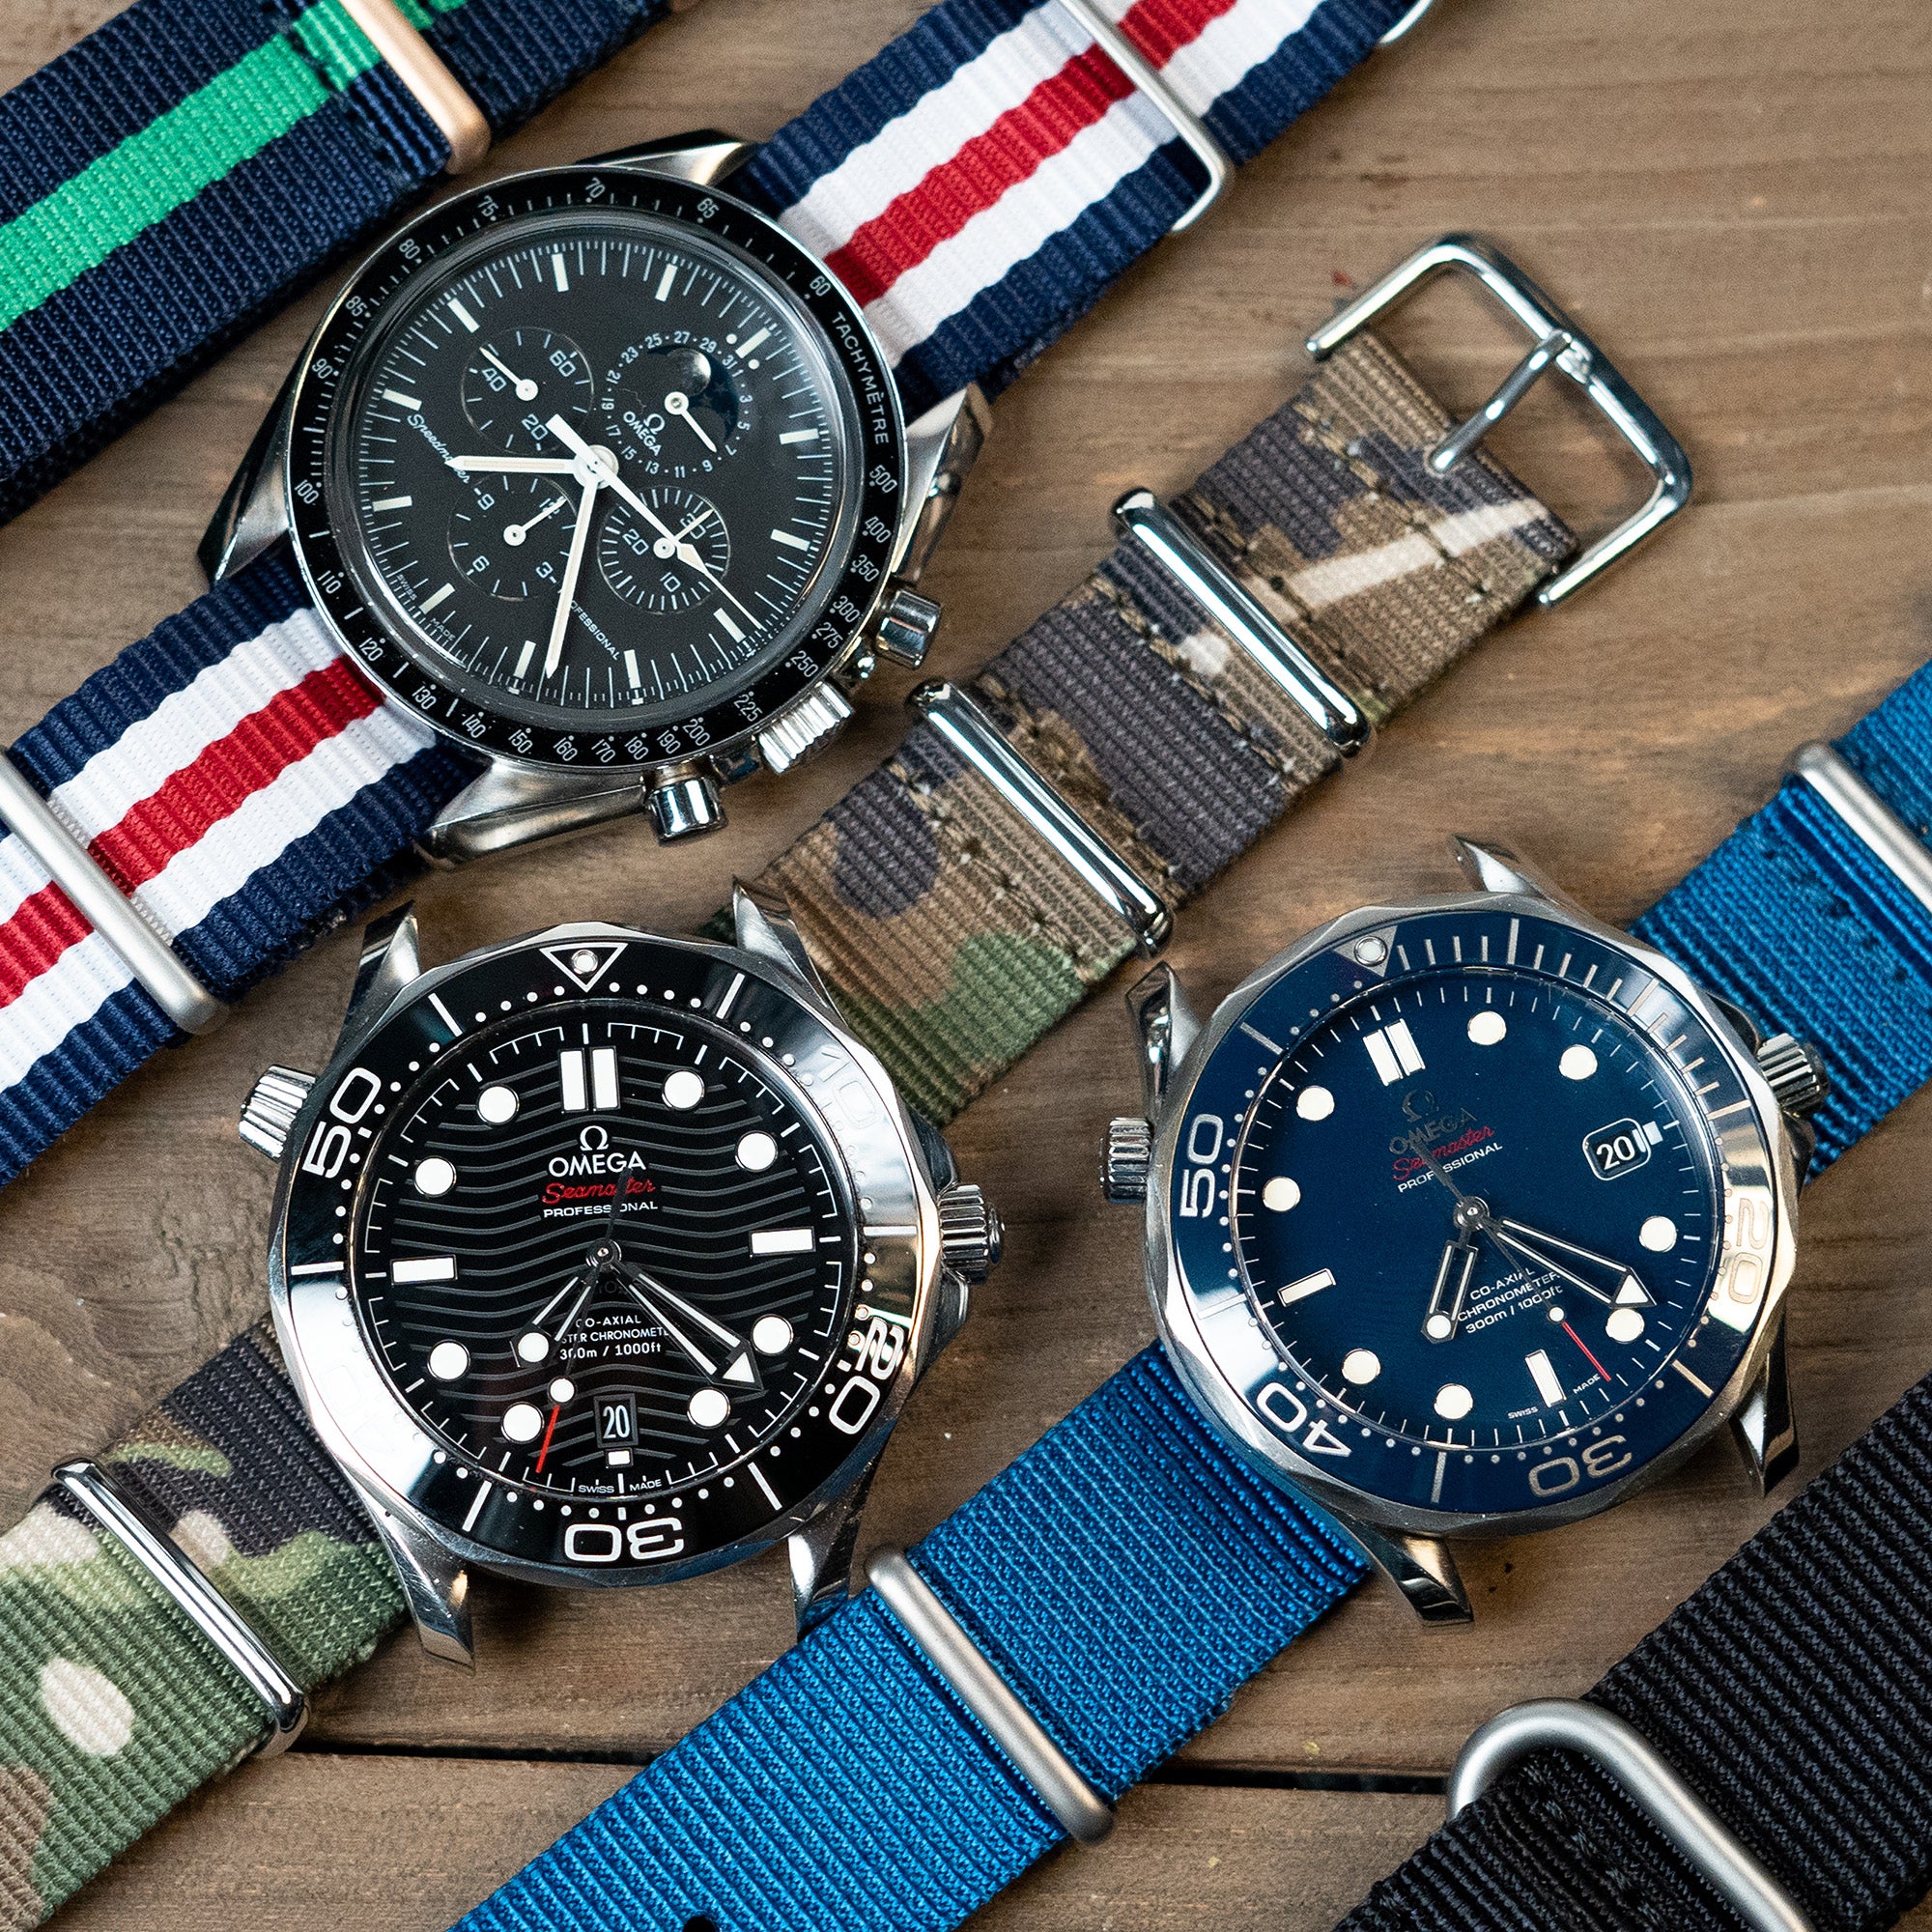 Omega X NATO Straps - The Past and Present State of that Collaboration